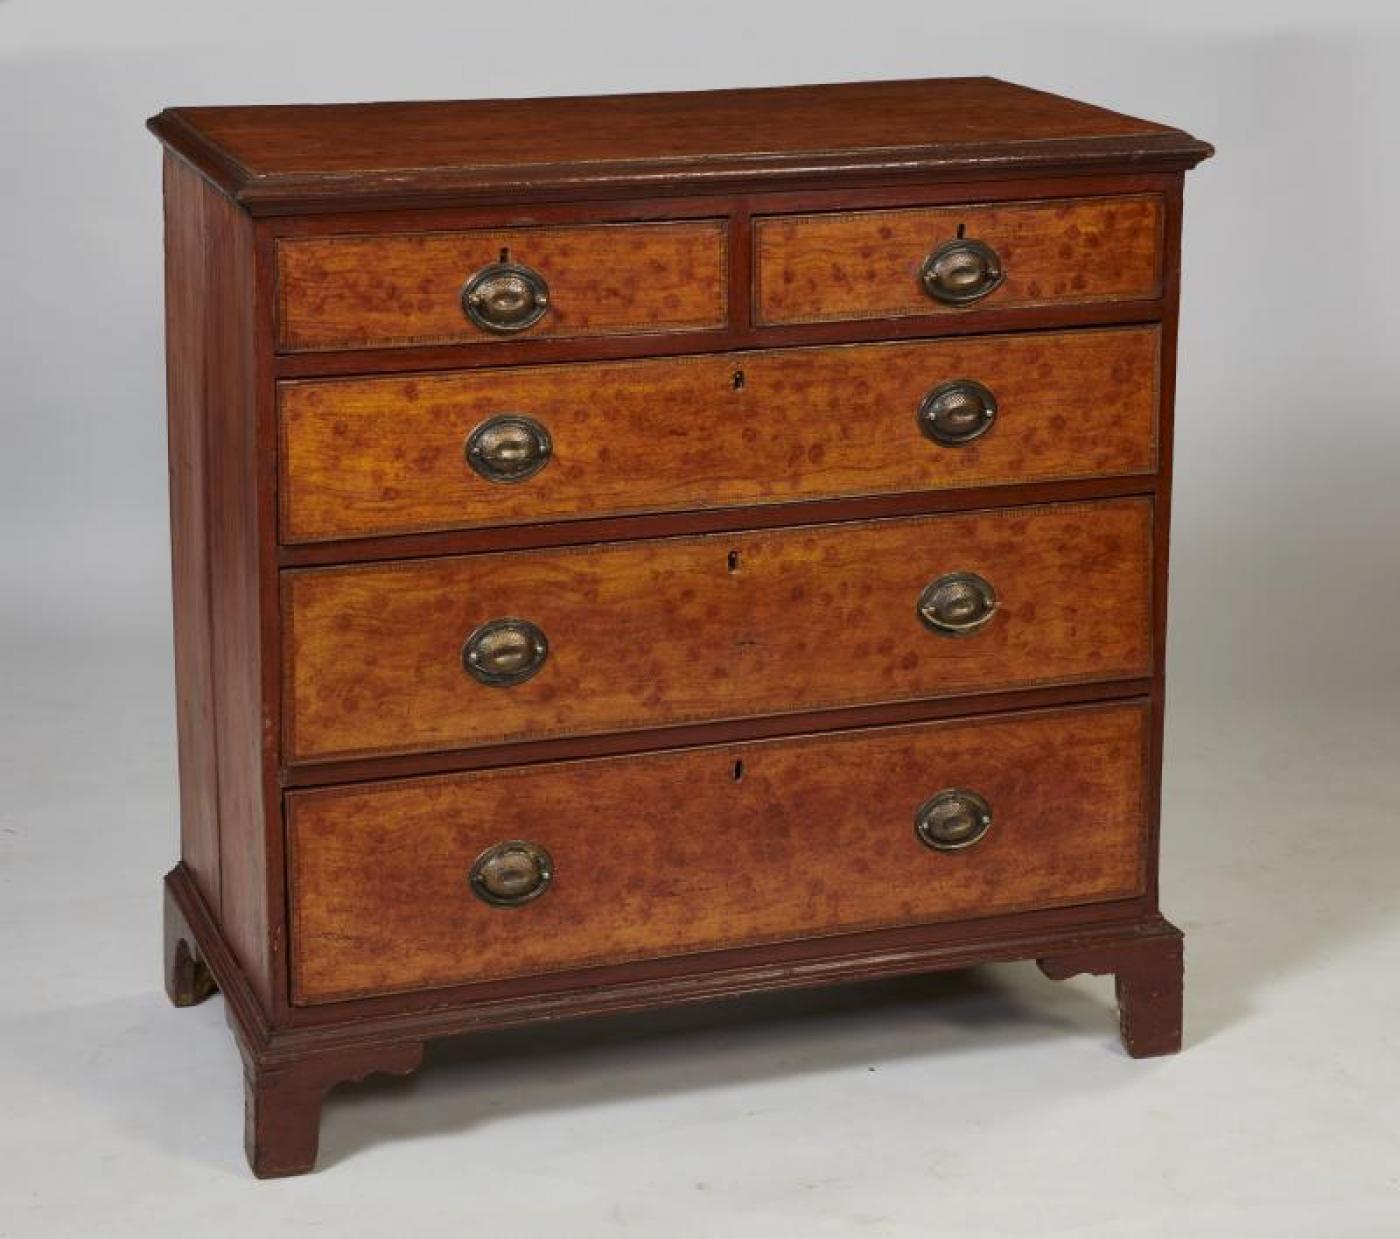 Rare George III period grain painted chest of drawers, the top with molded edge over four graduated drawers and standing on bracket feet, the whole painted to imitate satinwood with a rosewood banding - a rare survivor of this kind of decoration and